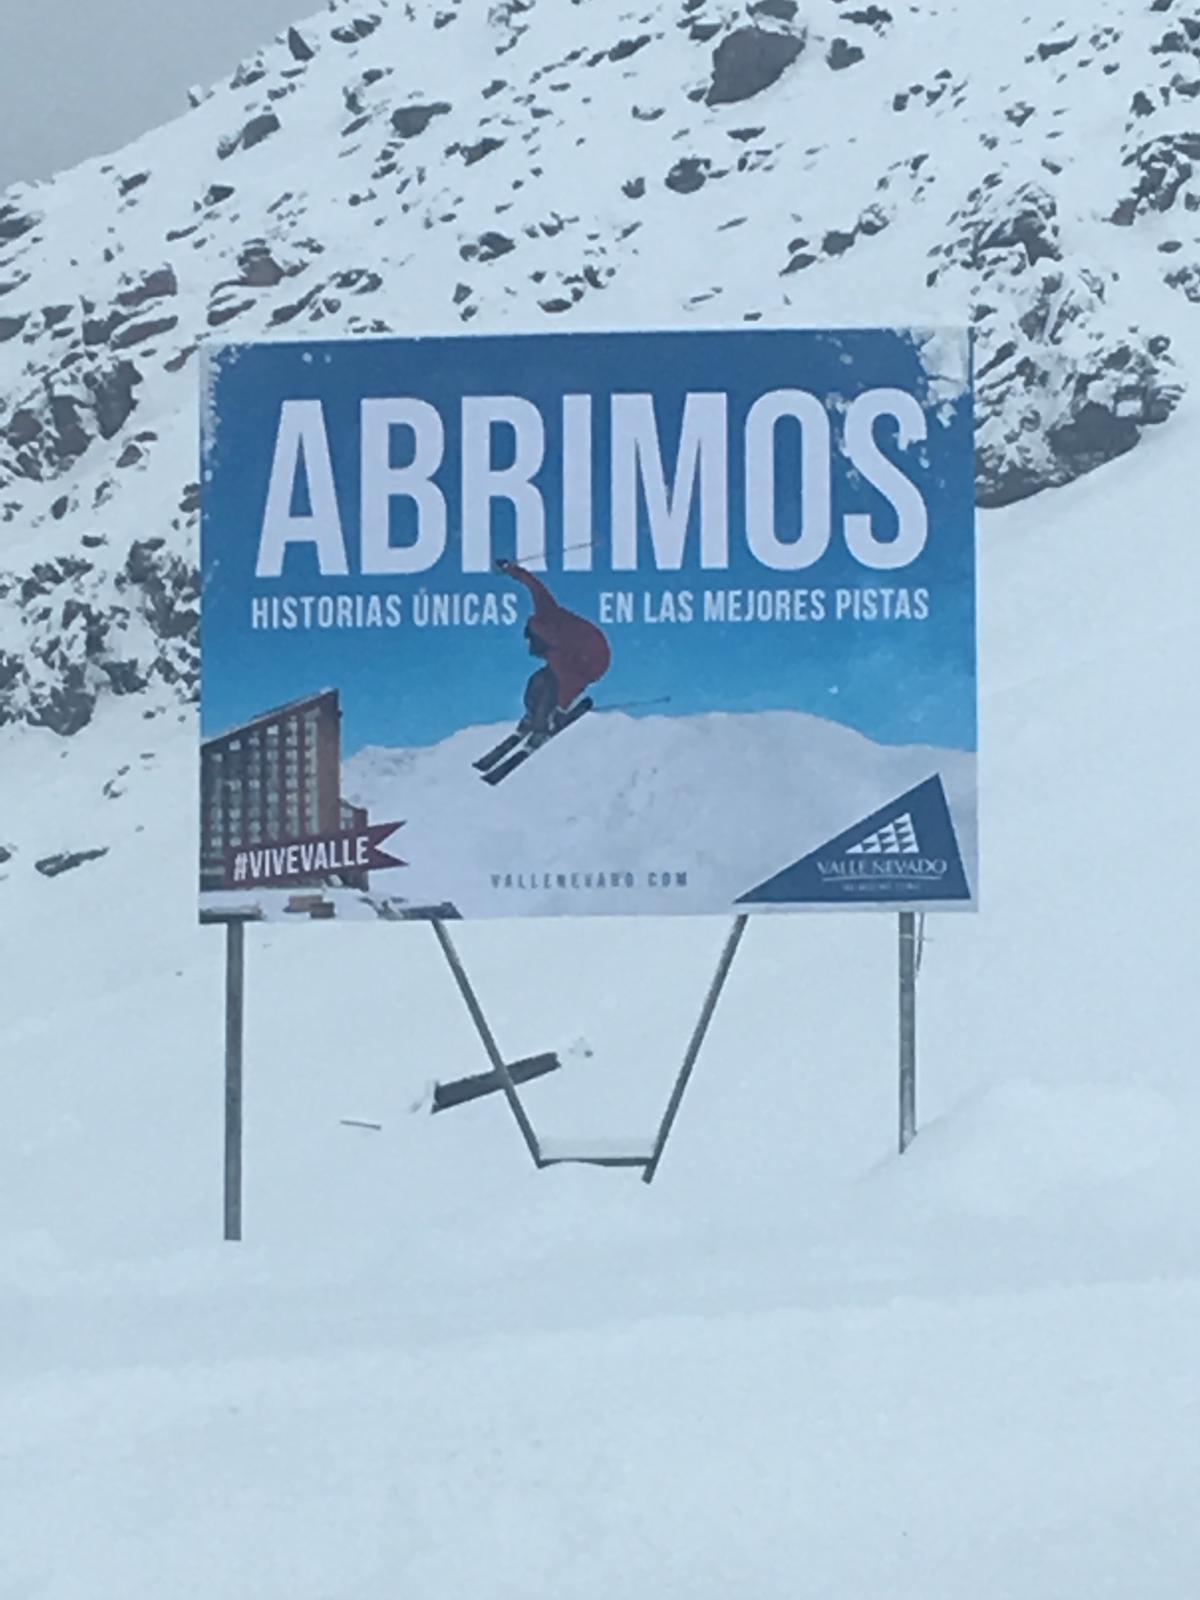 Sign of Valle Nevado stating they are open. Photo: Chino Martinez. A Day Trip to Valle Nevado from Santiago City.